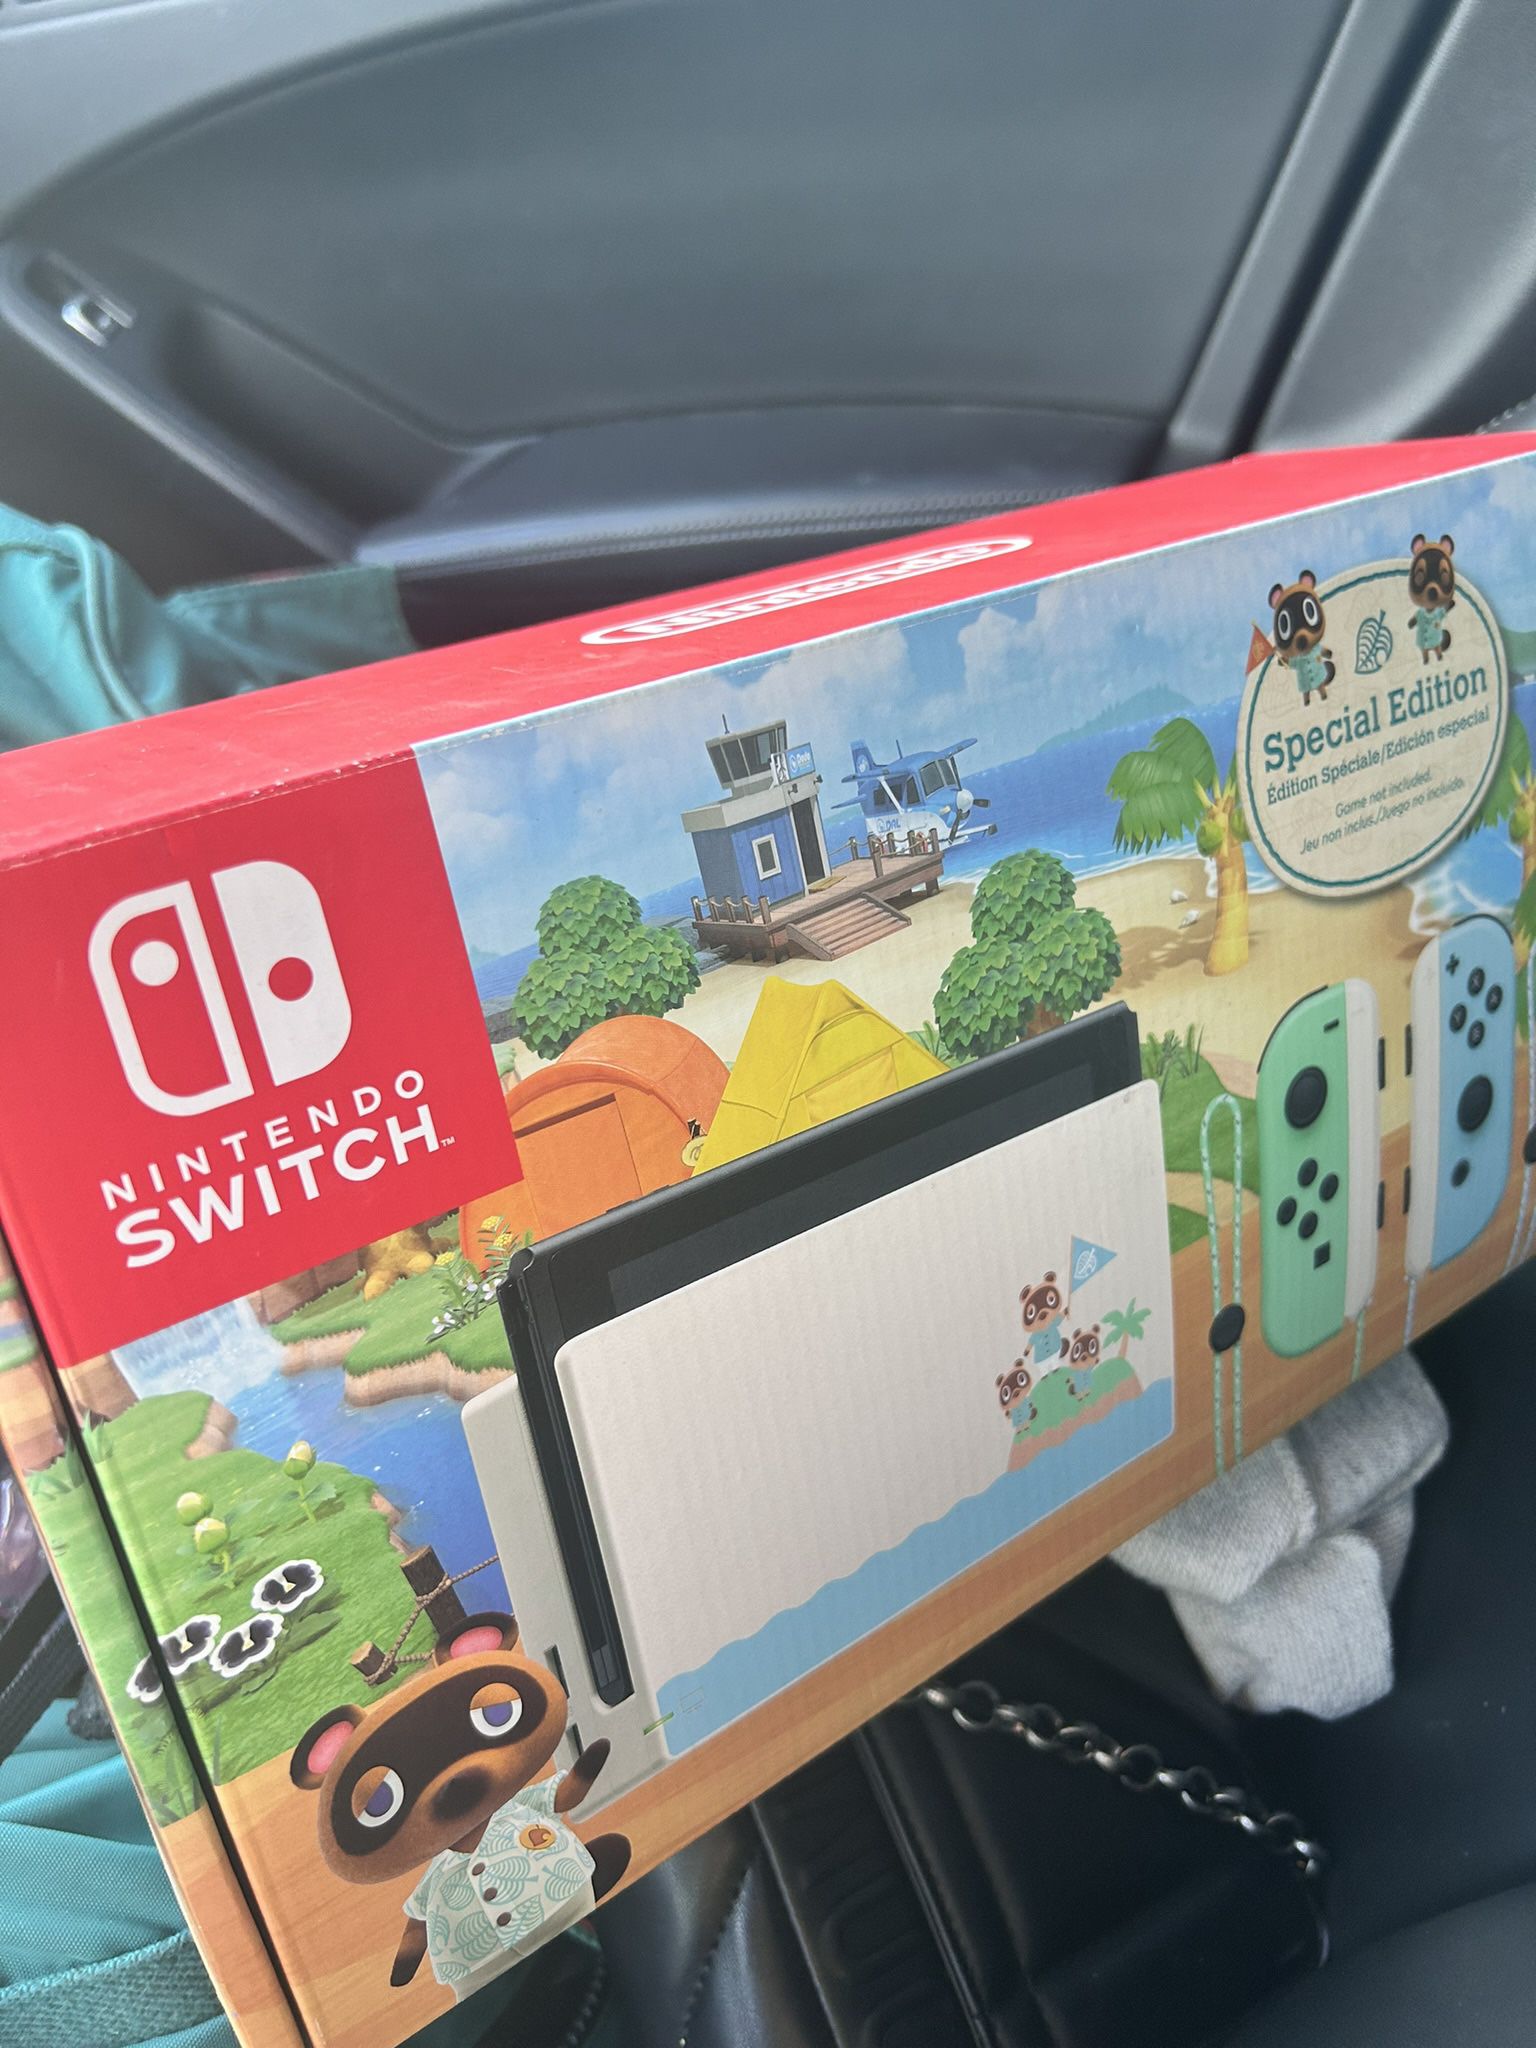 ANIMAL CROSSING NINTENDO SWITCH - New In The Box!